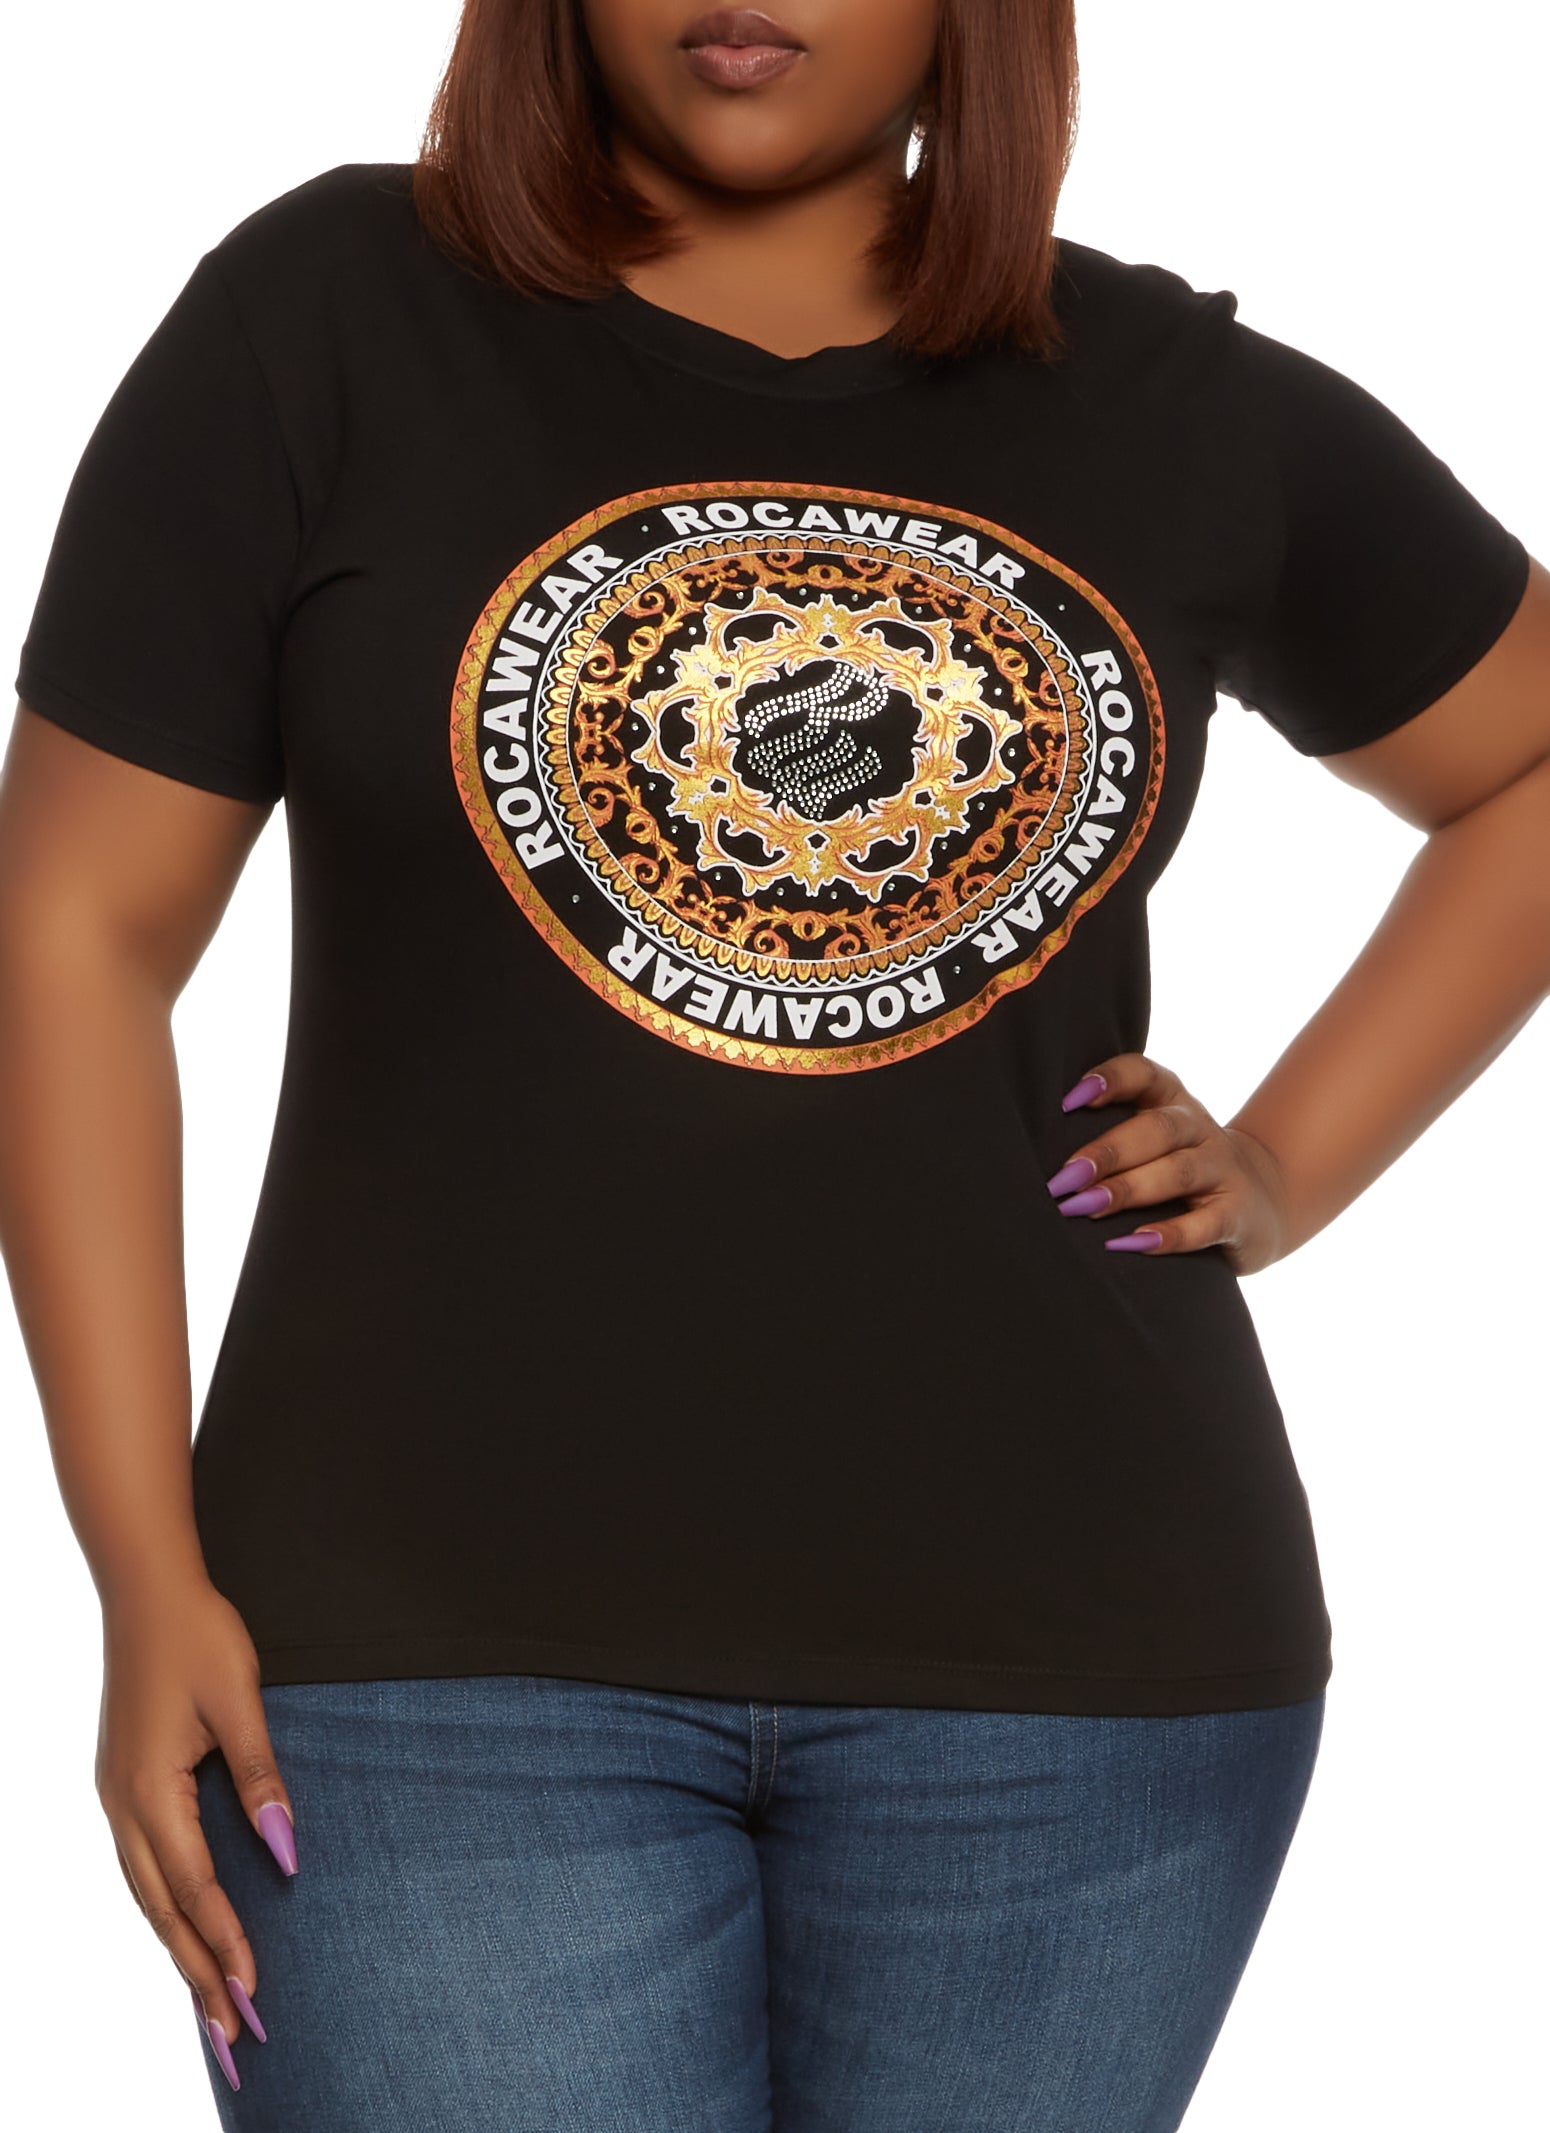 Plus Size Rocawear Foiled Baroque Graphic Tee -